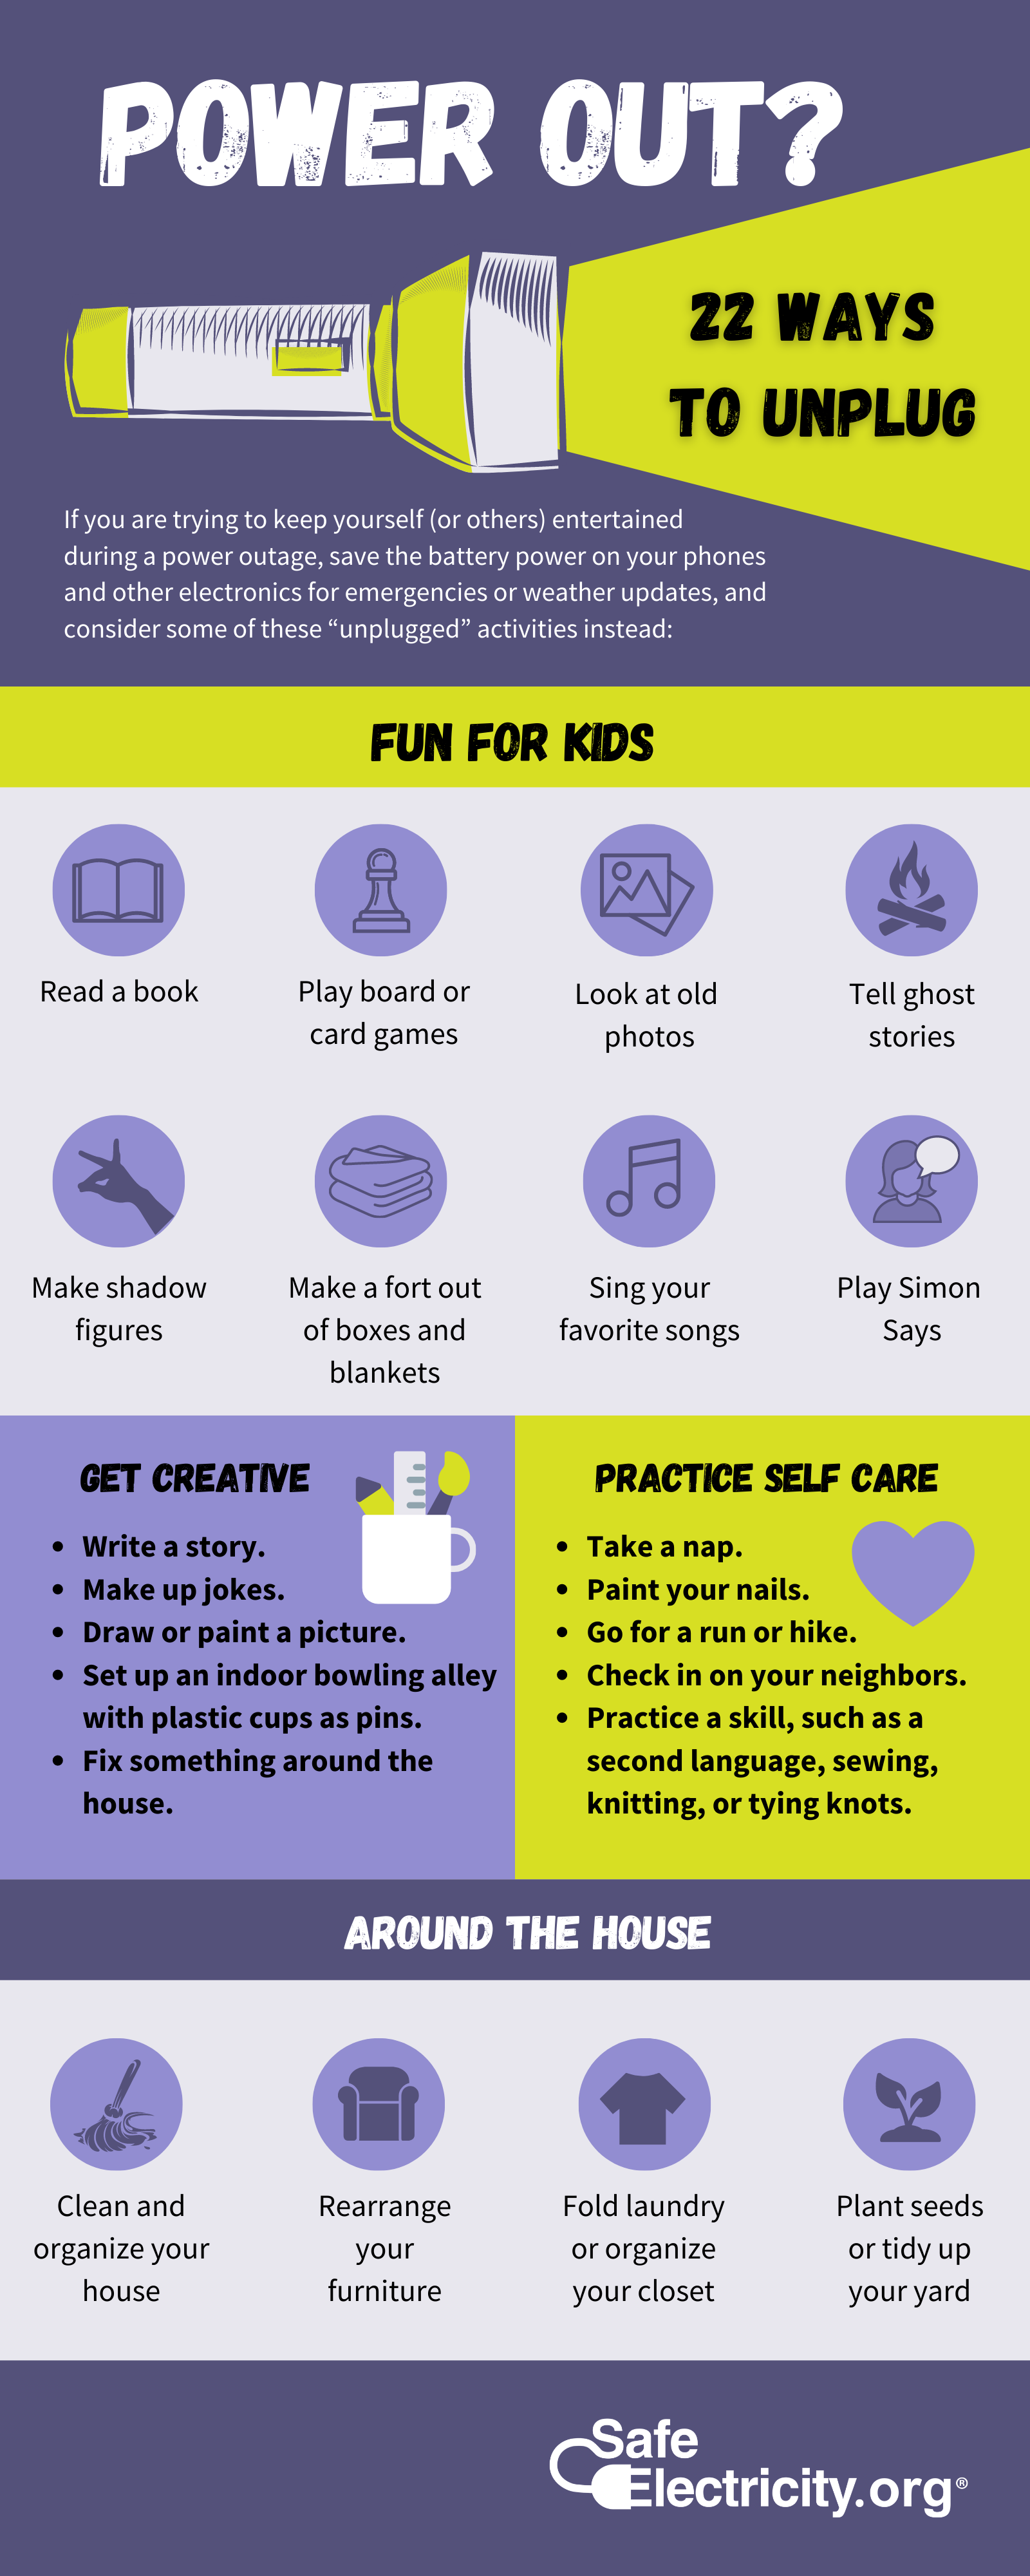 An infographic containing fun activities to do with kids when the power goes out. 